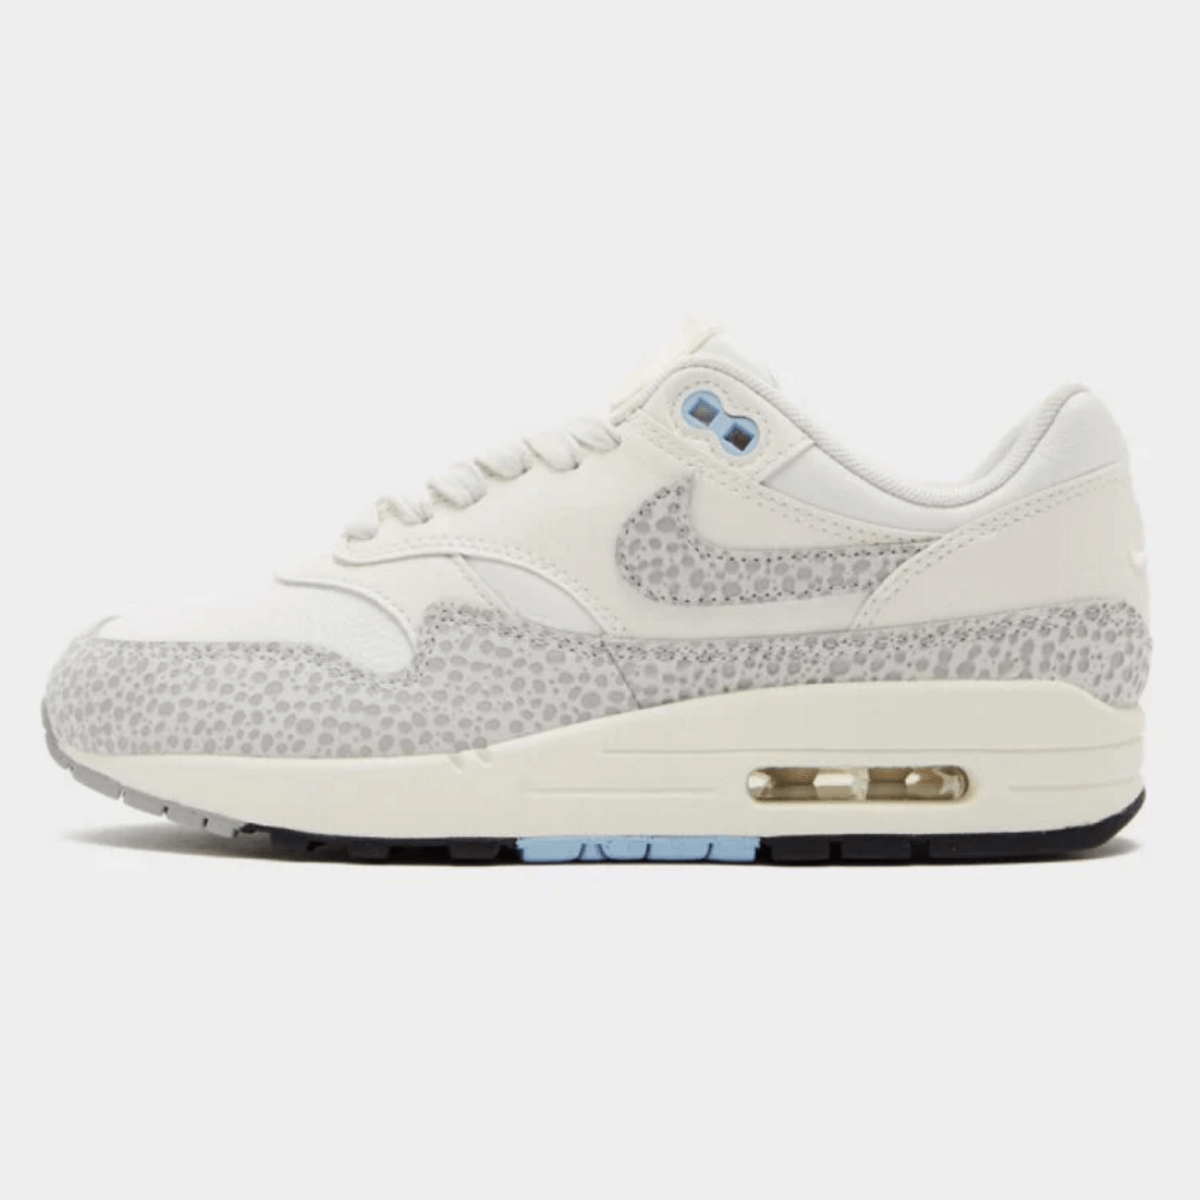 Show Your Wild Style With The Nike Air Max 1 Safari Summit White